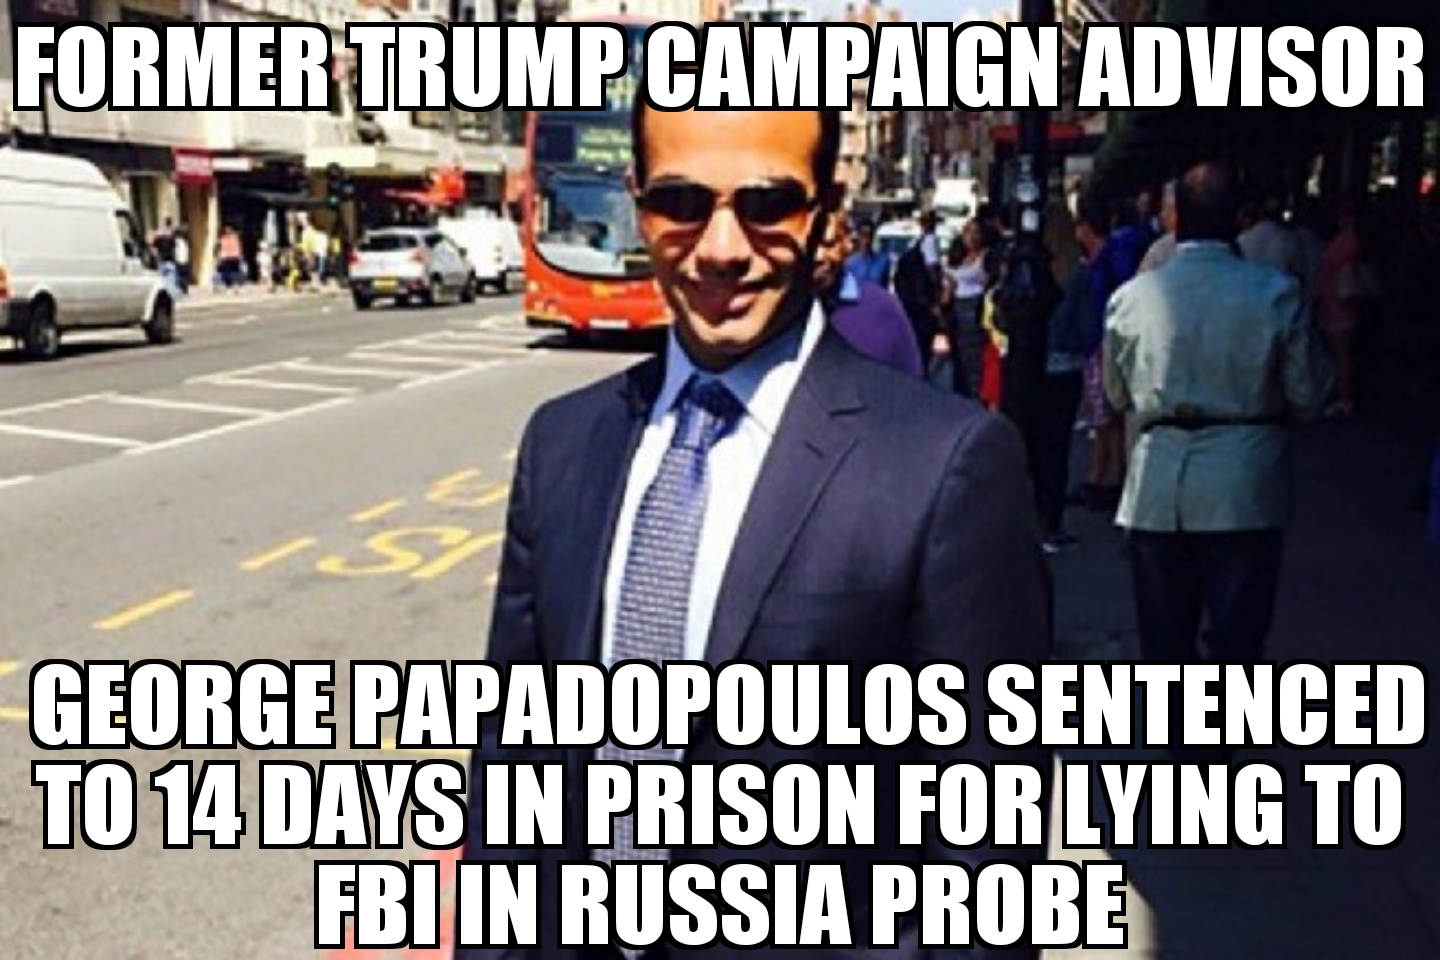 George Papadopoulos given 14 days for lying to FBI